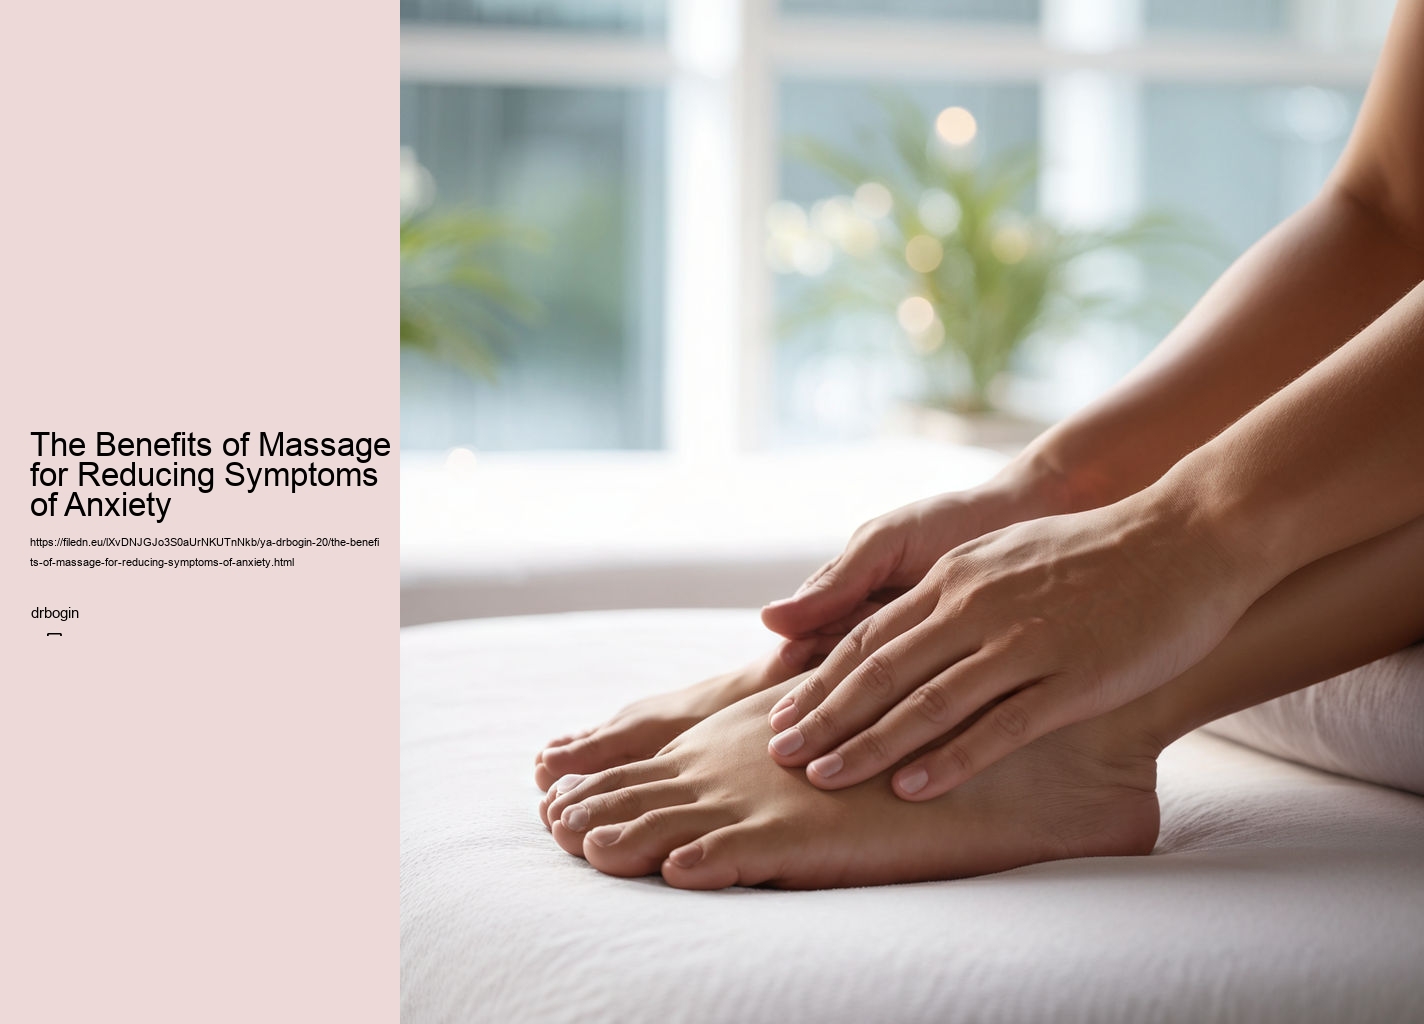 The Benefits of Massage for Reducing Symptoms of Anxiety